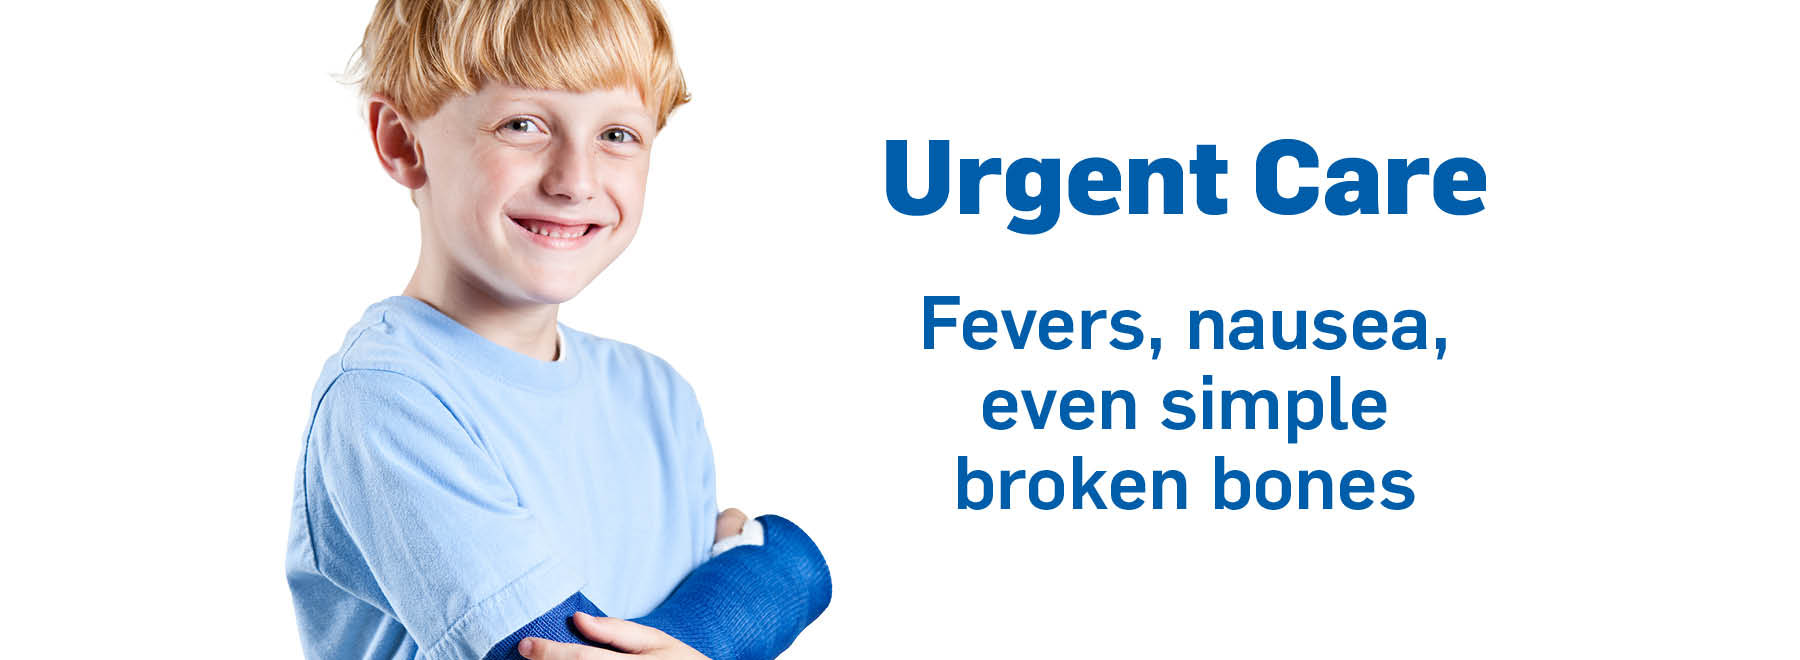 A boy in a blue shirt with his arm in a blue cast and next to him is text that says Urgent Care - fevers, nausea, even simple broken bones